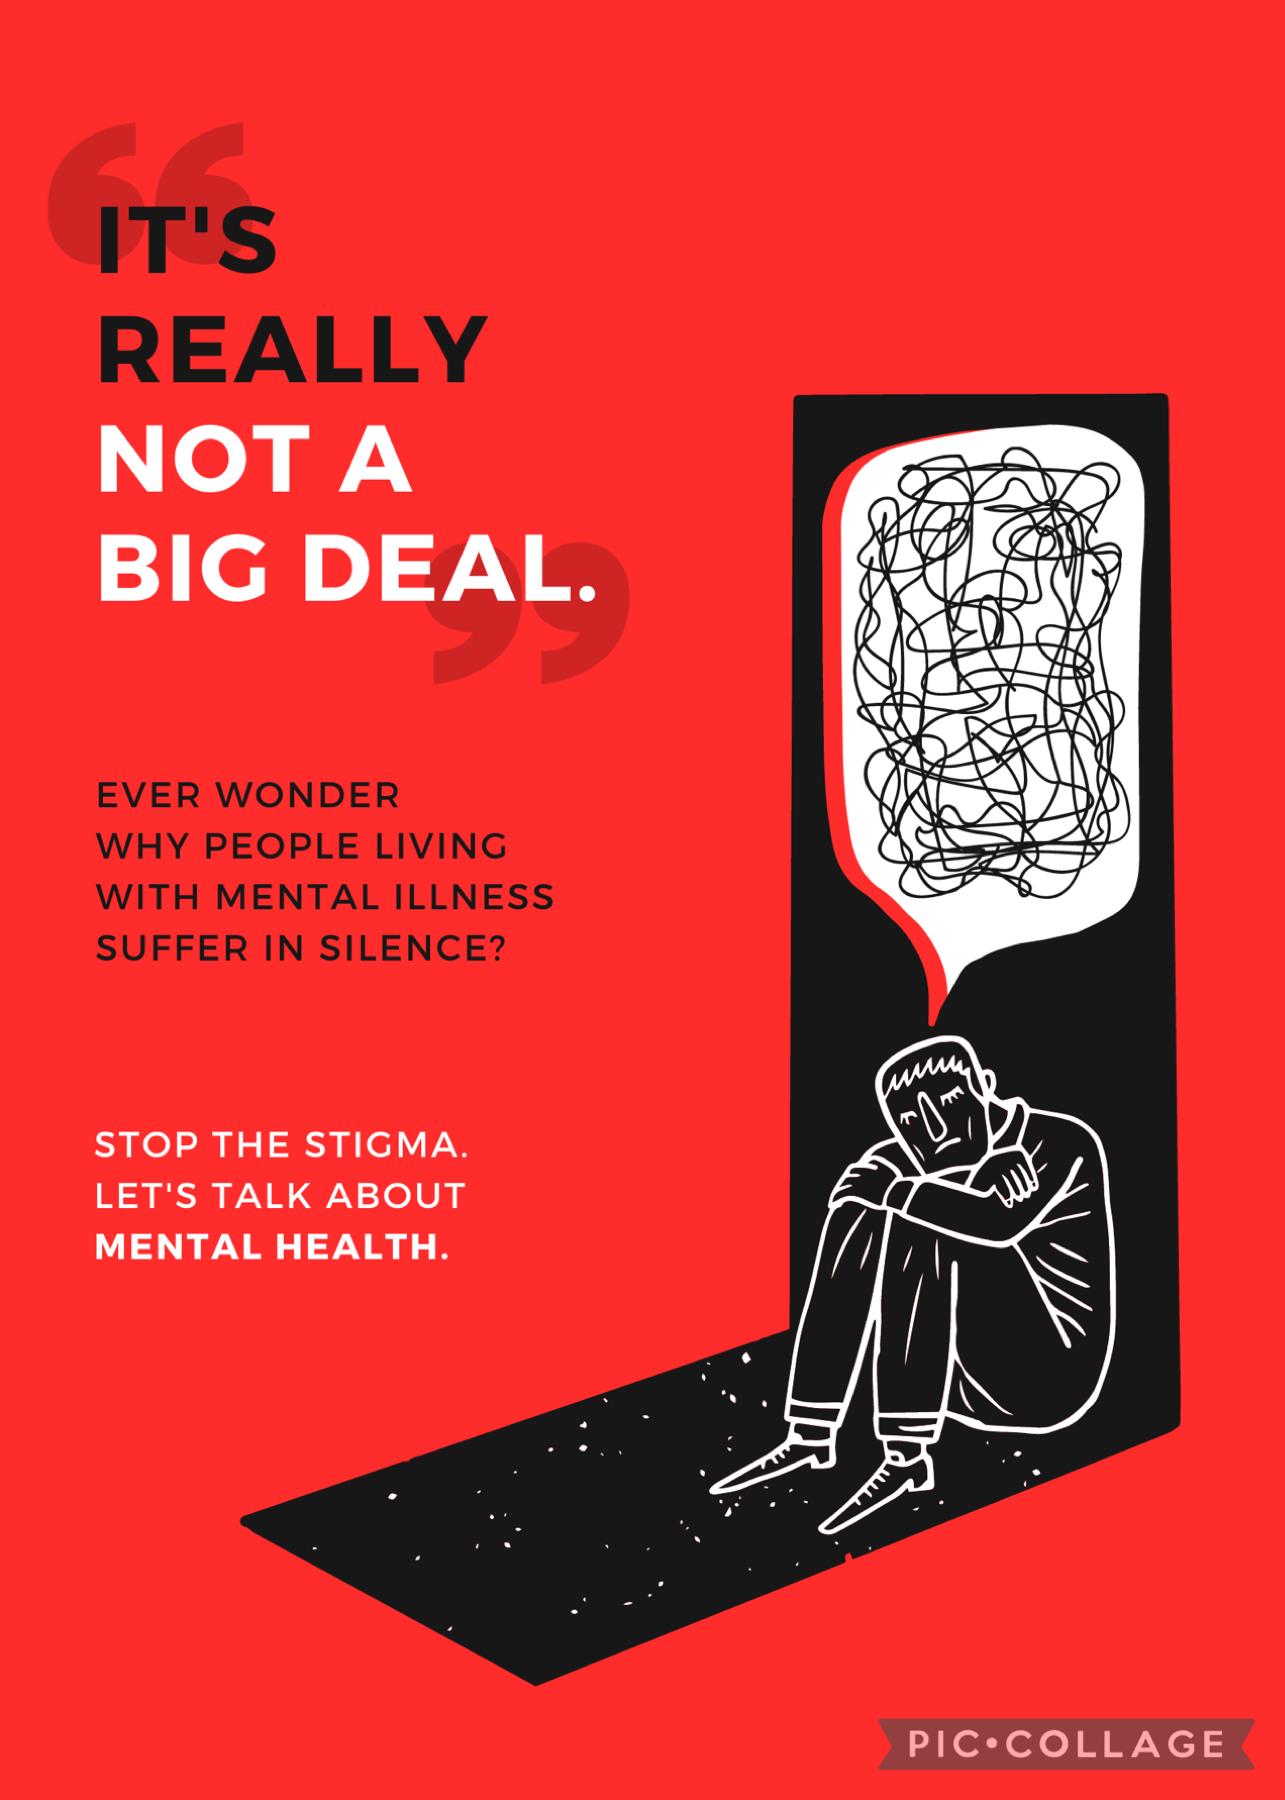 This month It’s Mental Health Awareness Month!! This month we should all try and make time to learn about why mental health is important, and why we should make it a priority. Remember, I’m always here to talk if any of you need somebody to listen. 💗
Temp